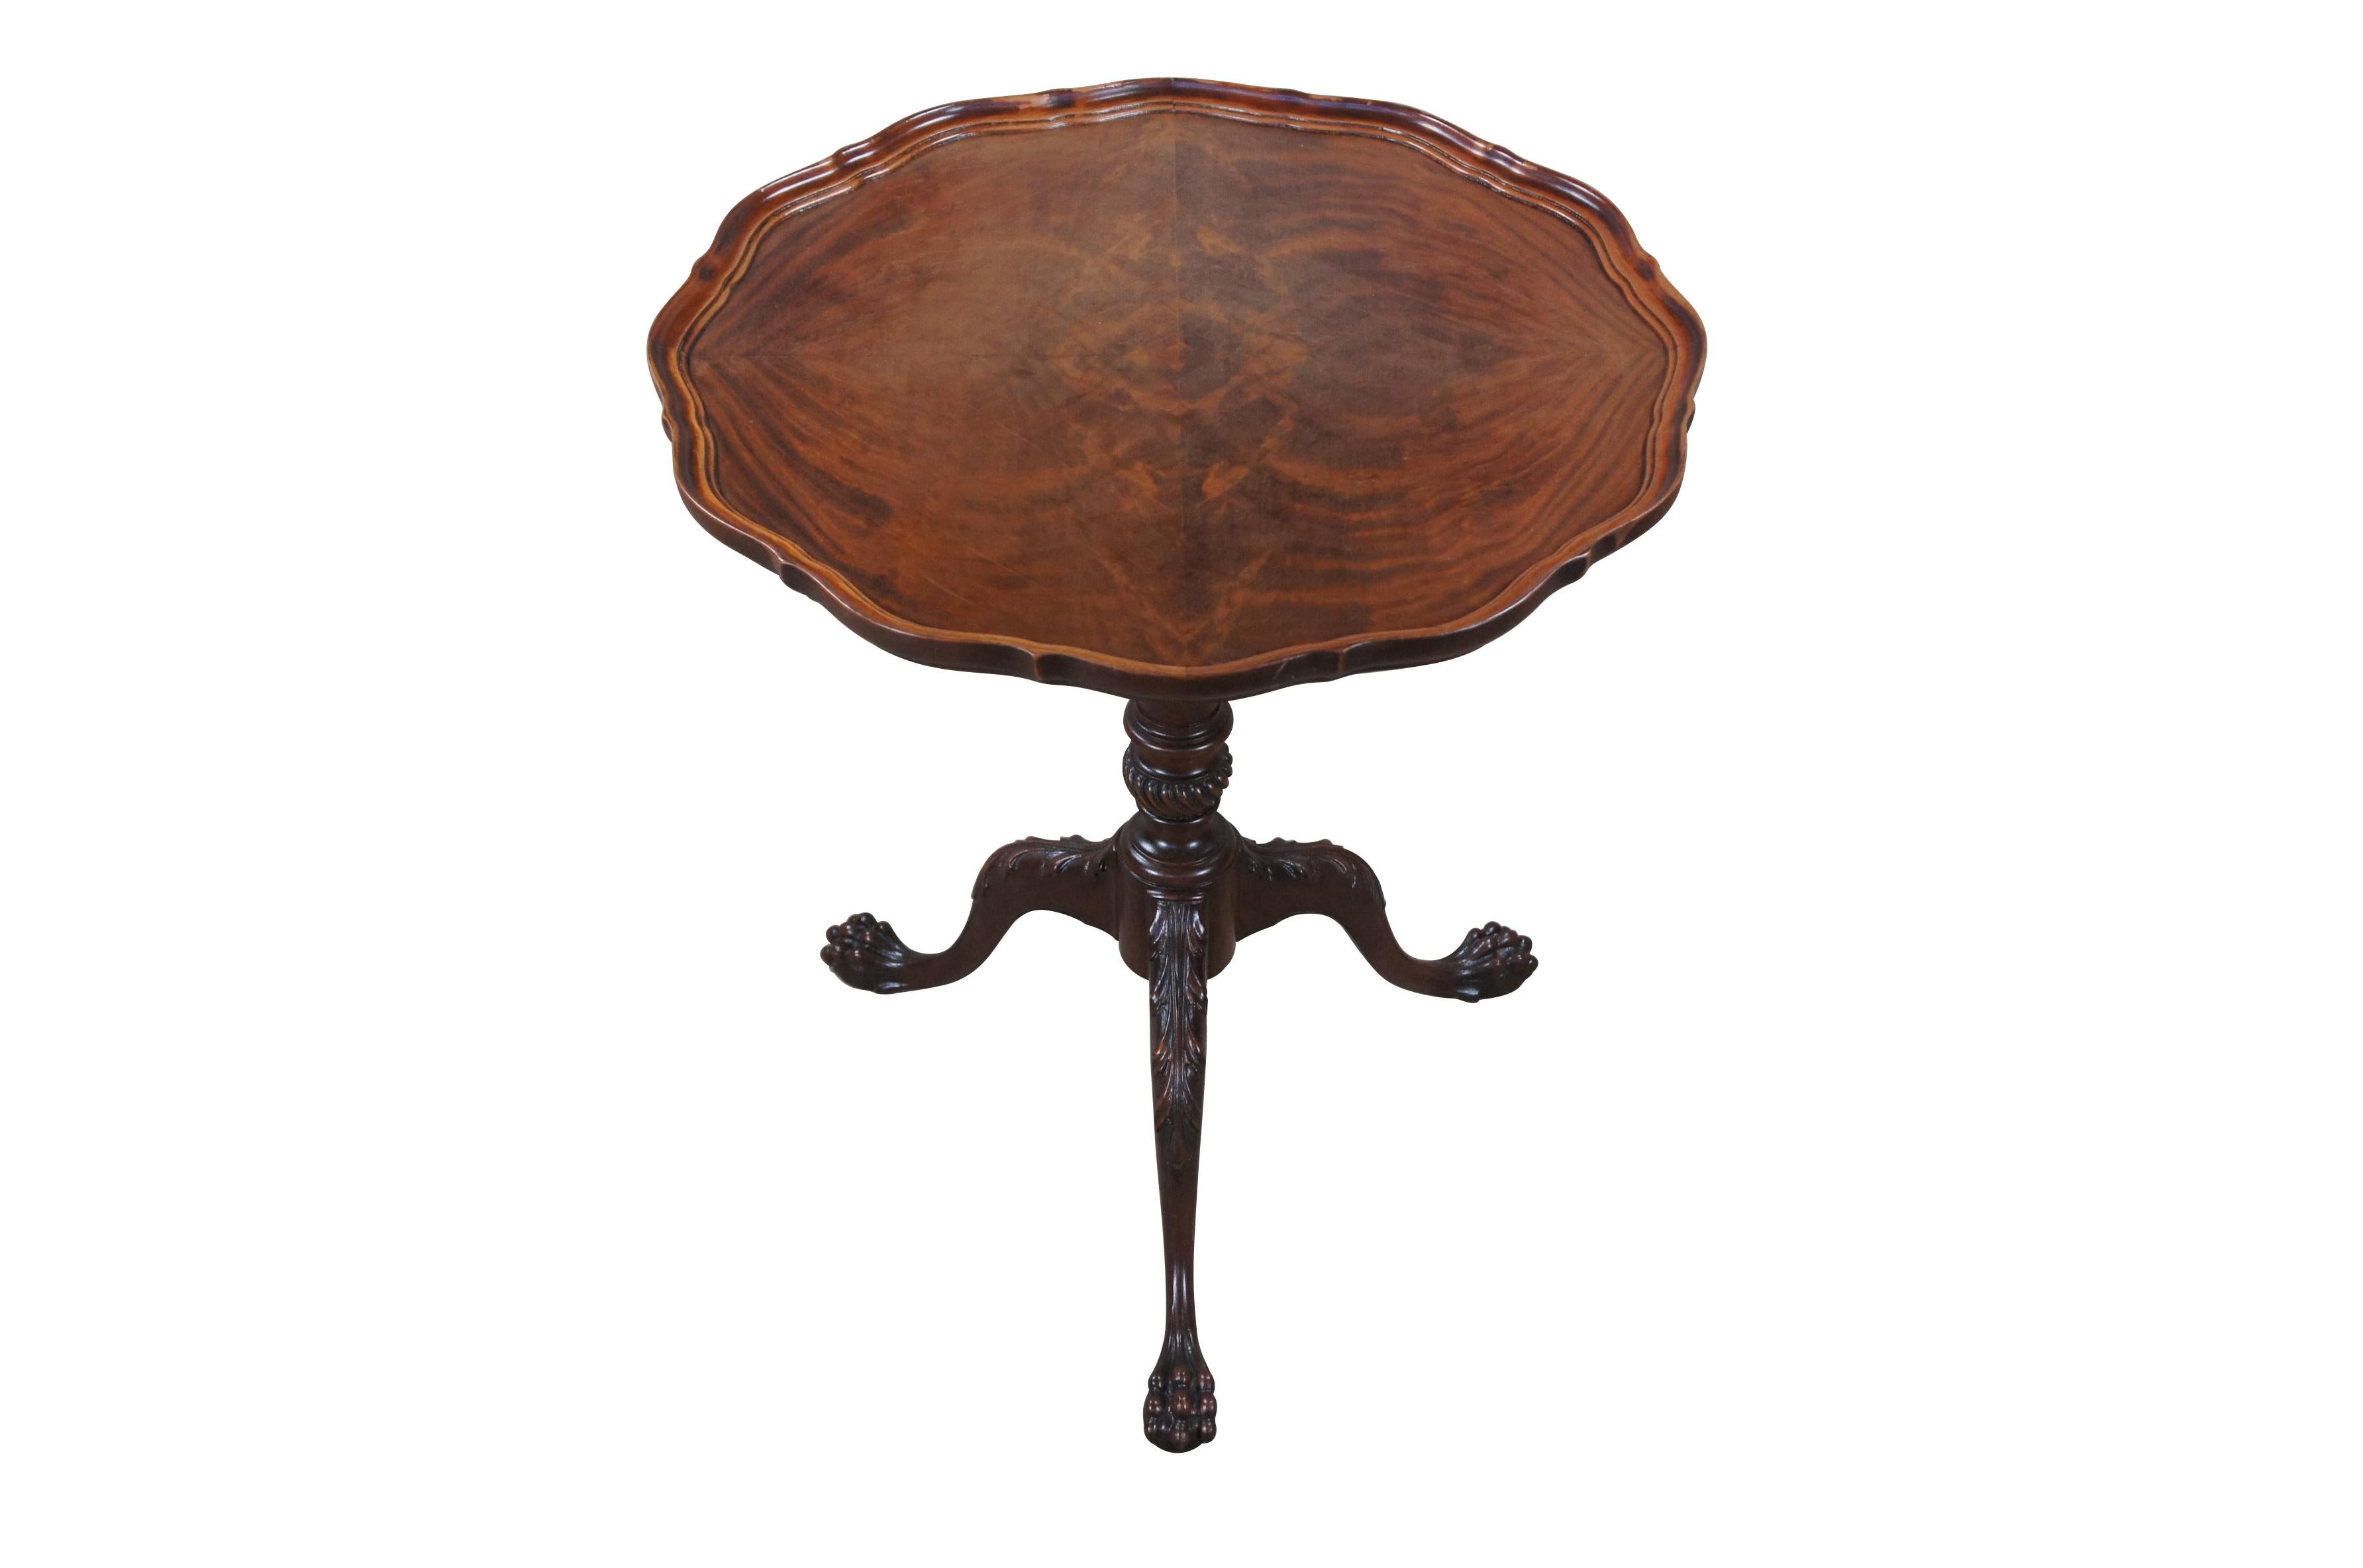 Antique Chippendale Flame Mahogany Pie Crust Ball & Claw Pedestal Tea Table  In Good Condition For Sale In Dayton, OH